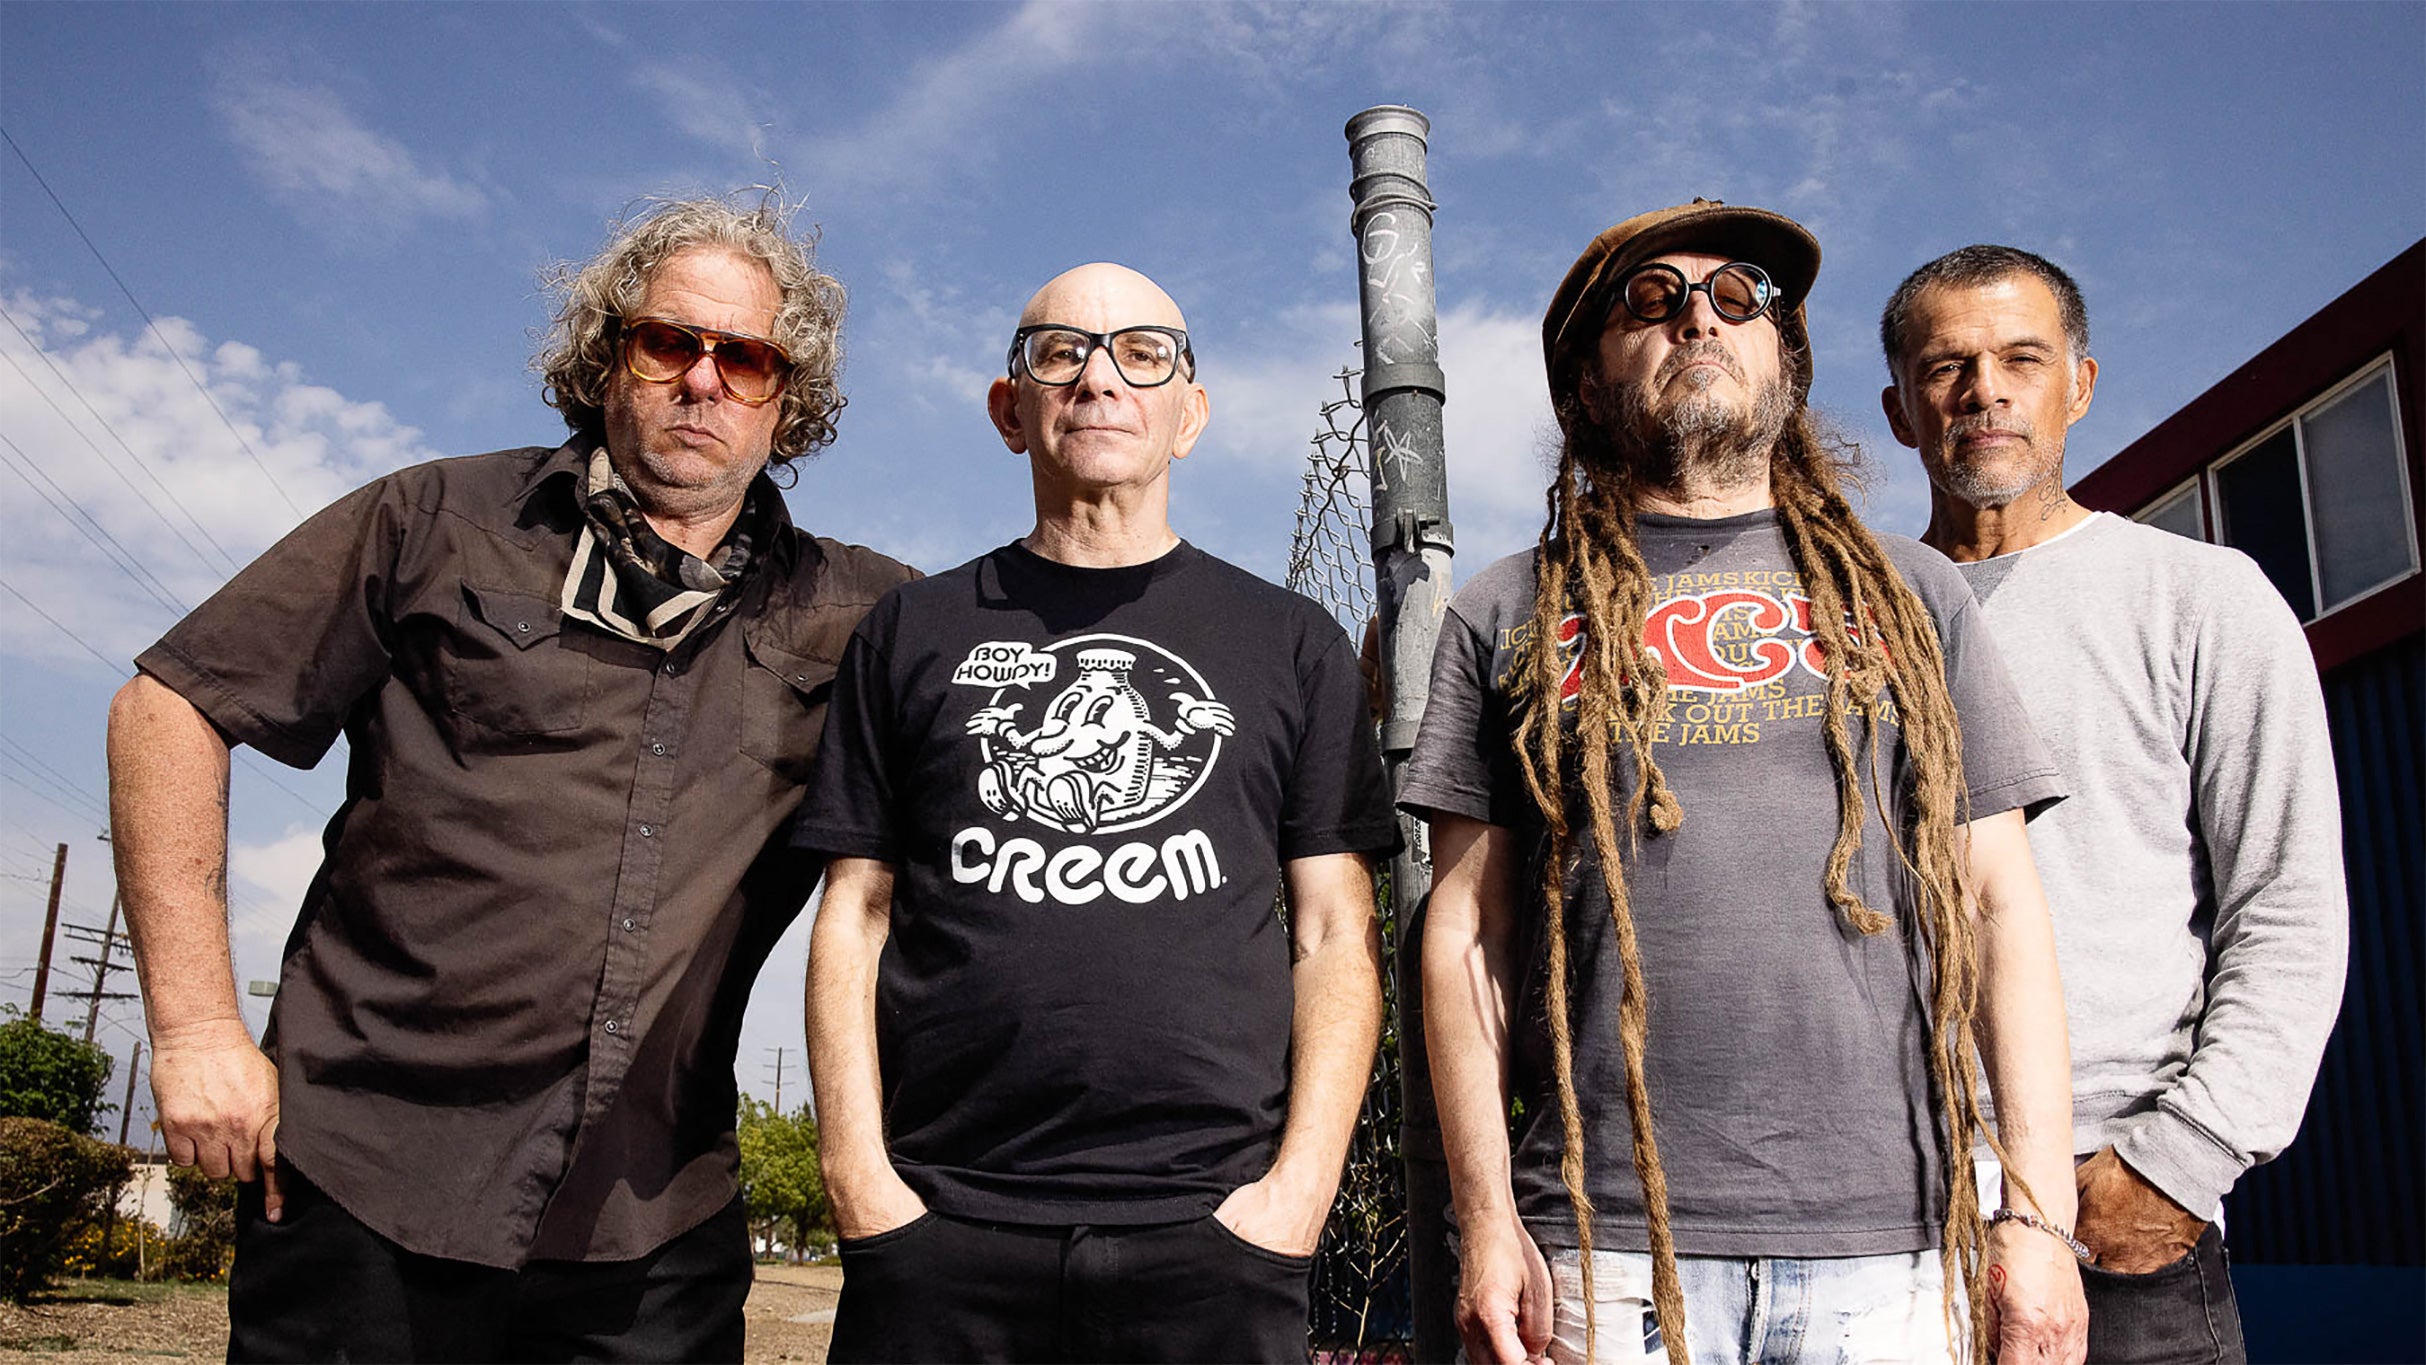 Circle Jerks and Descendents in Raleigh promo photo for Artist presale offer code